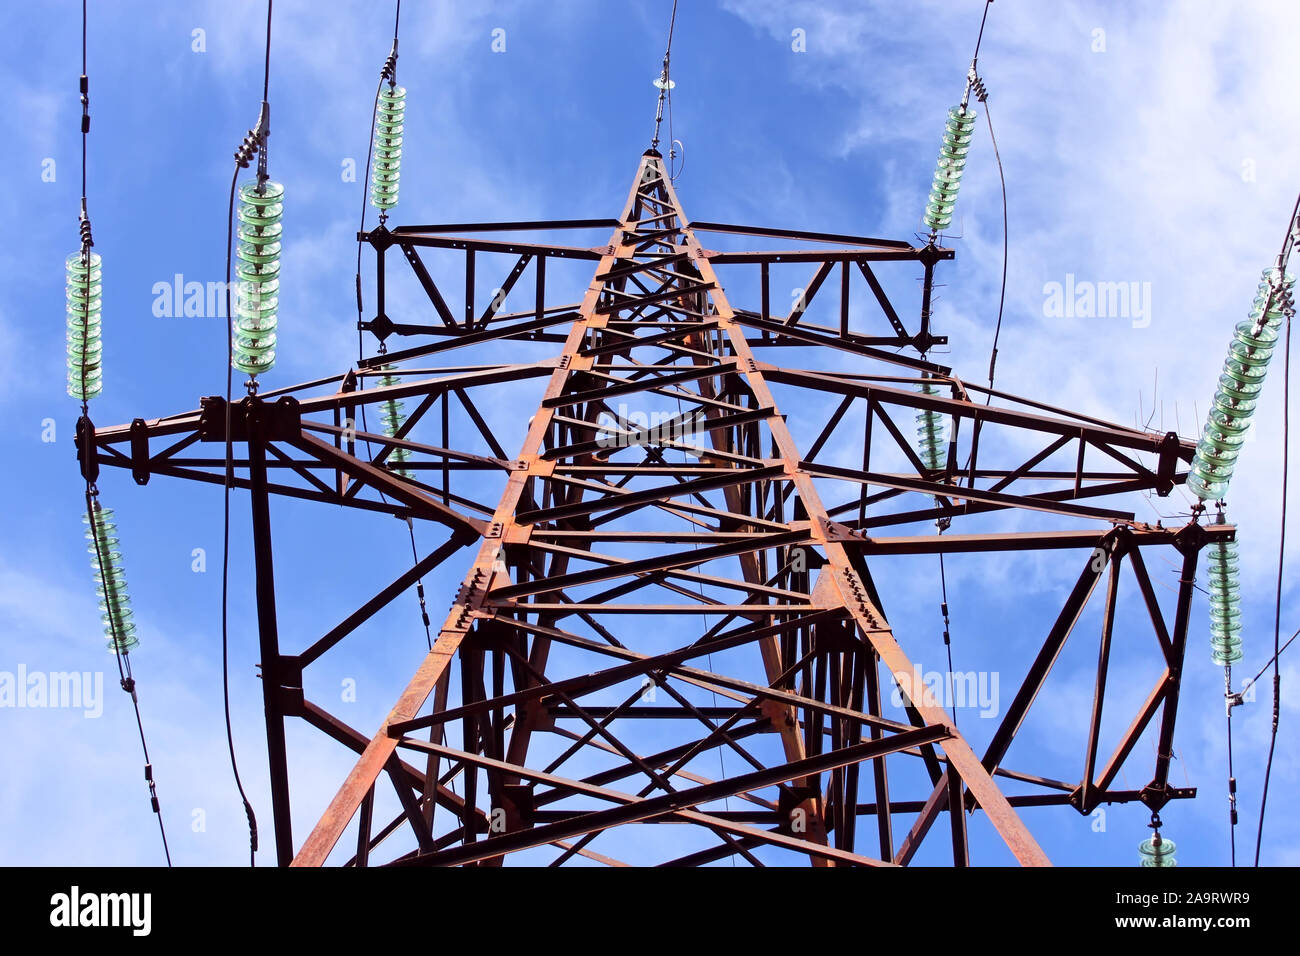 High-voltage electric lattice tower with wires and insulators against the sky Stock Photo